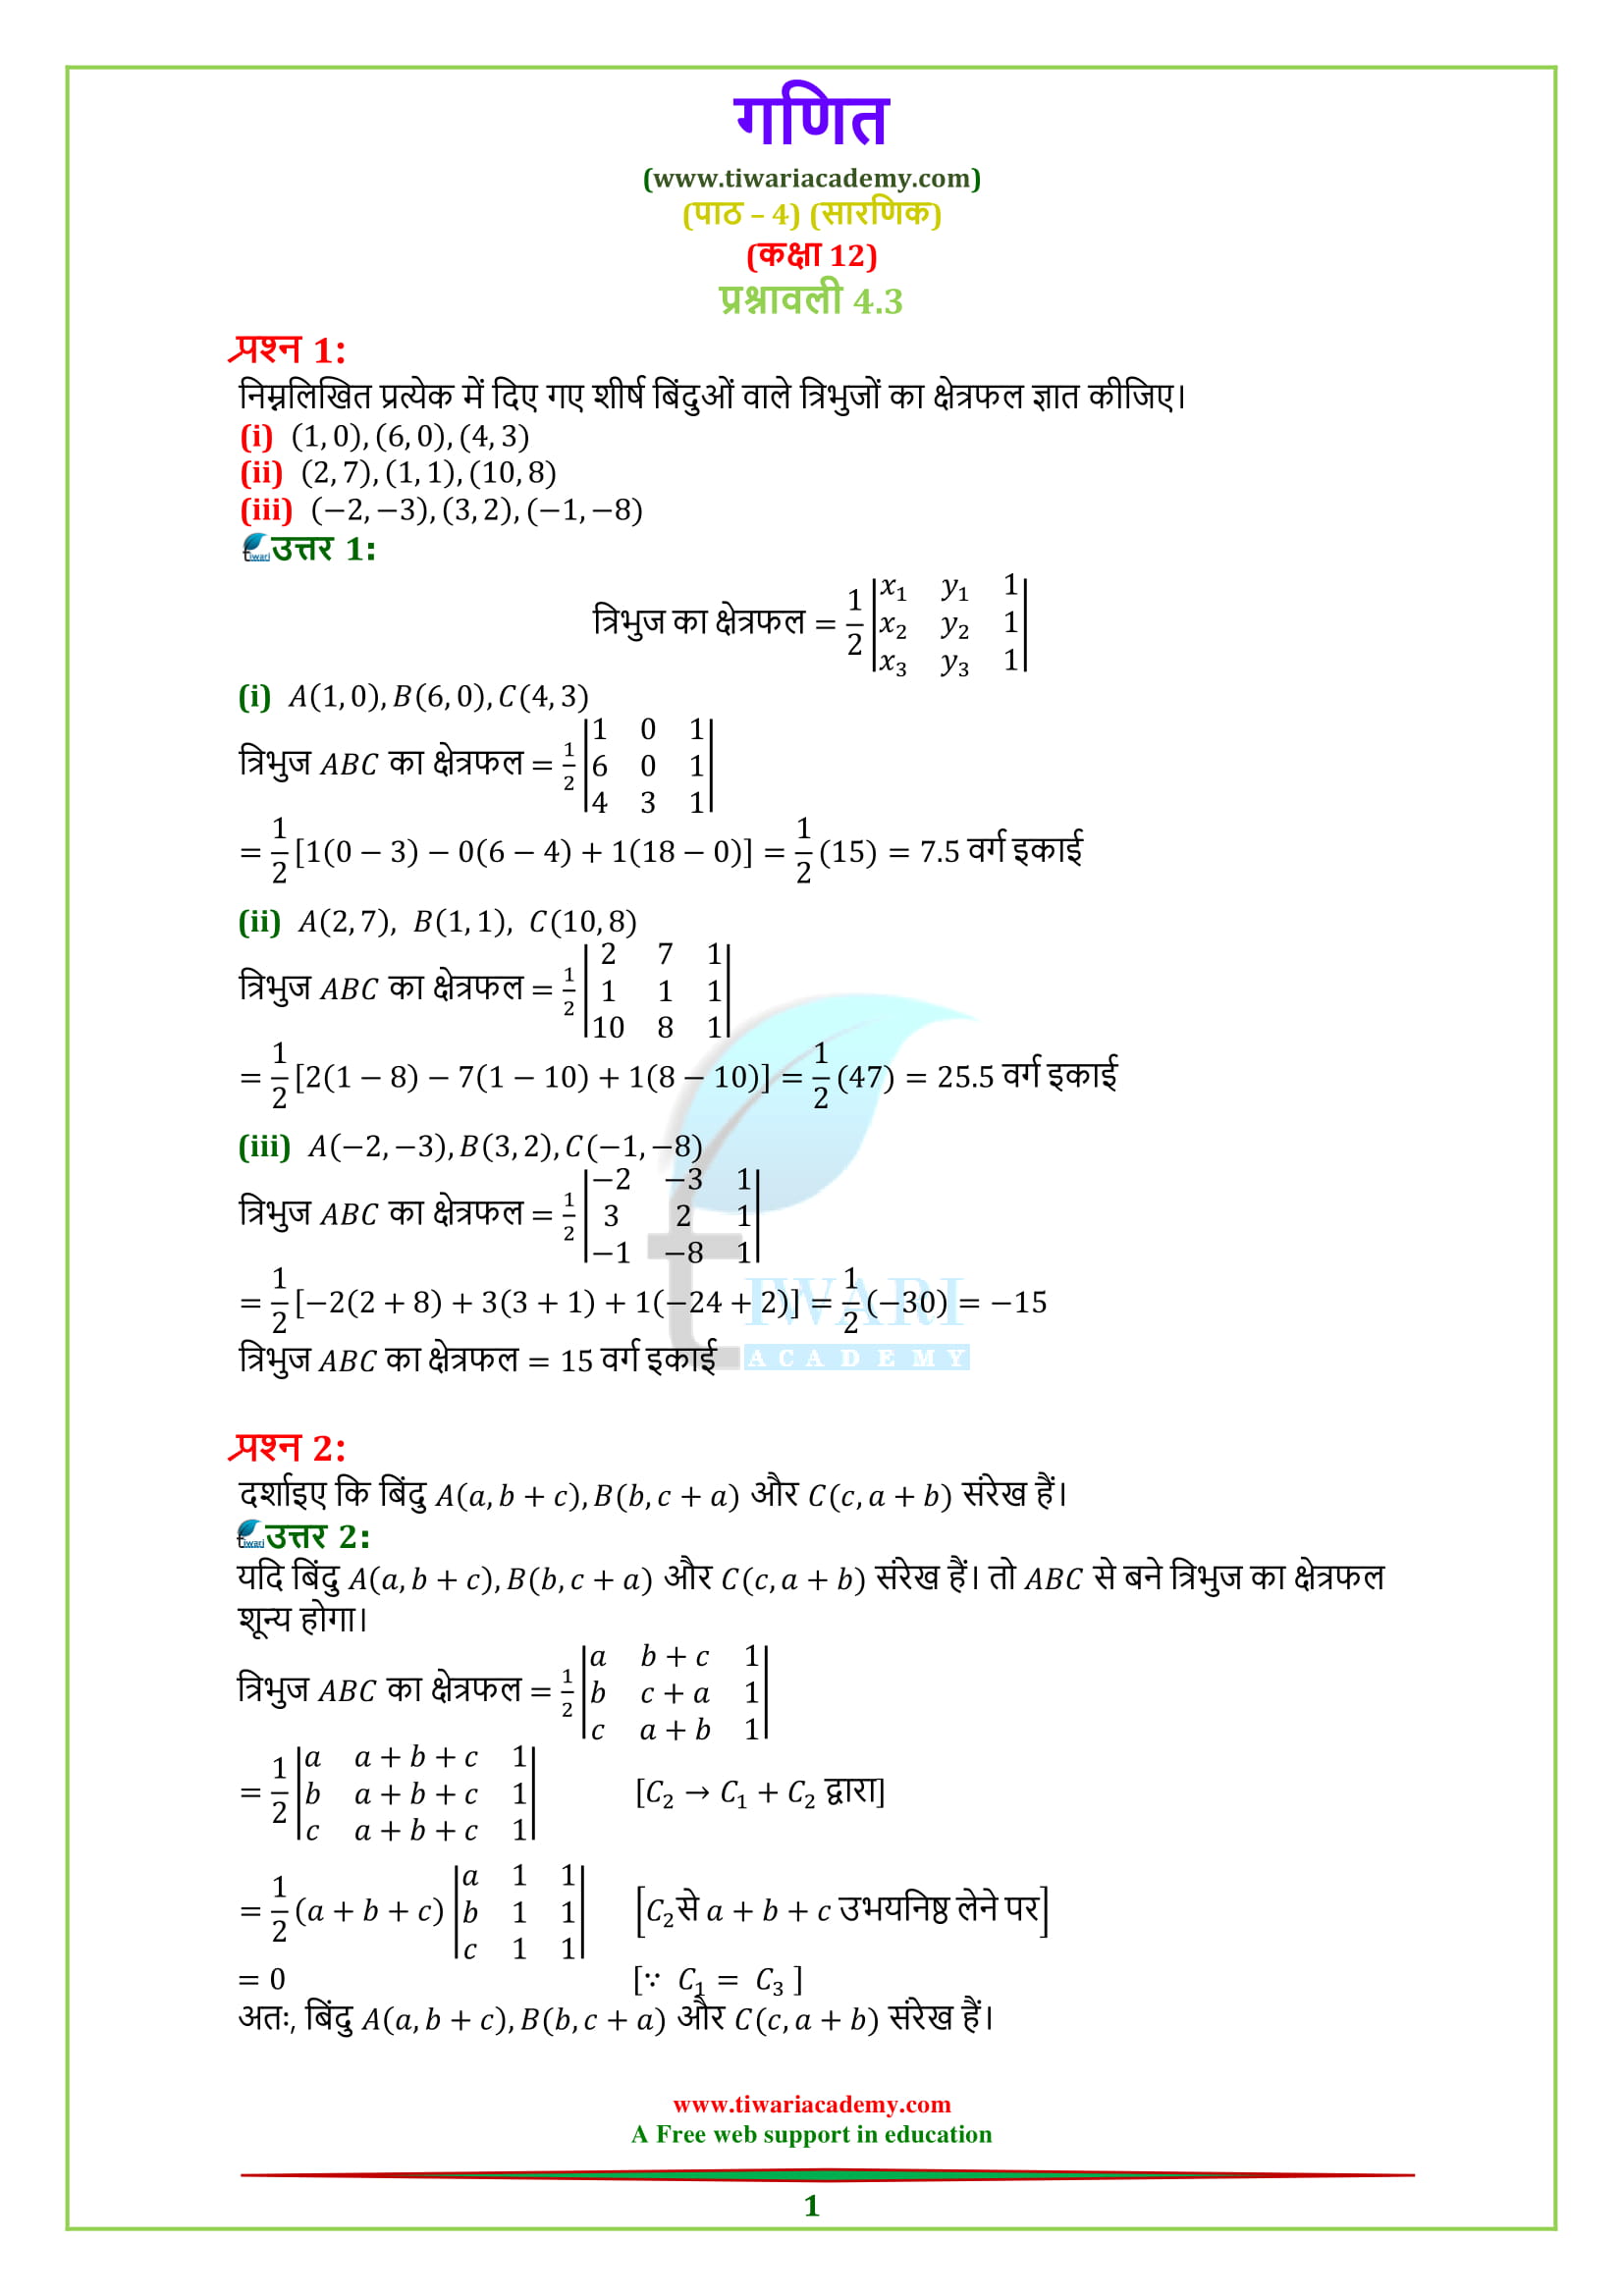 Class 12 Maths Chapter 4 Exercise 4.3 Solutions in Hindi Medium PDF